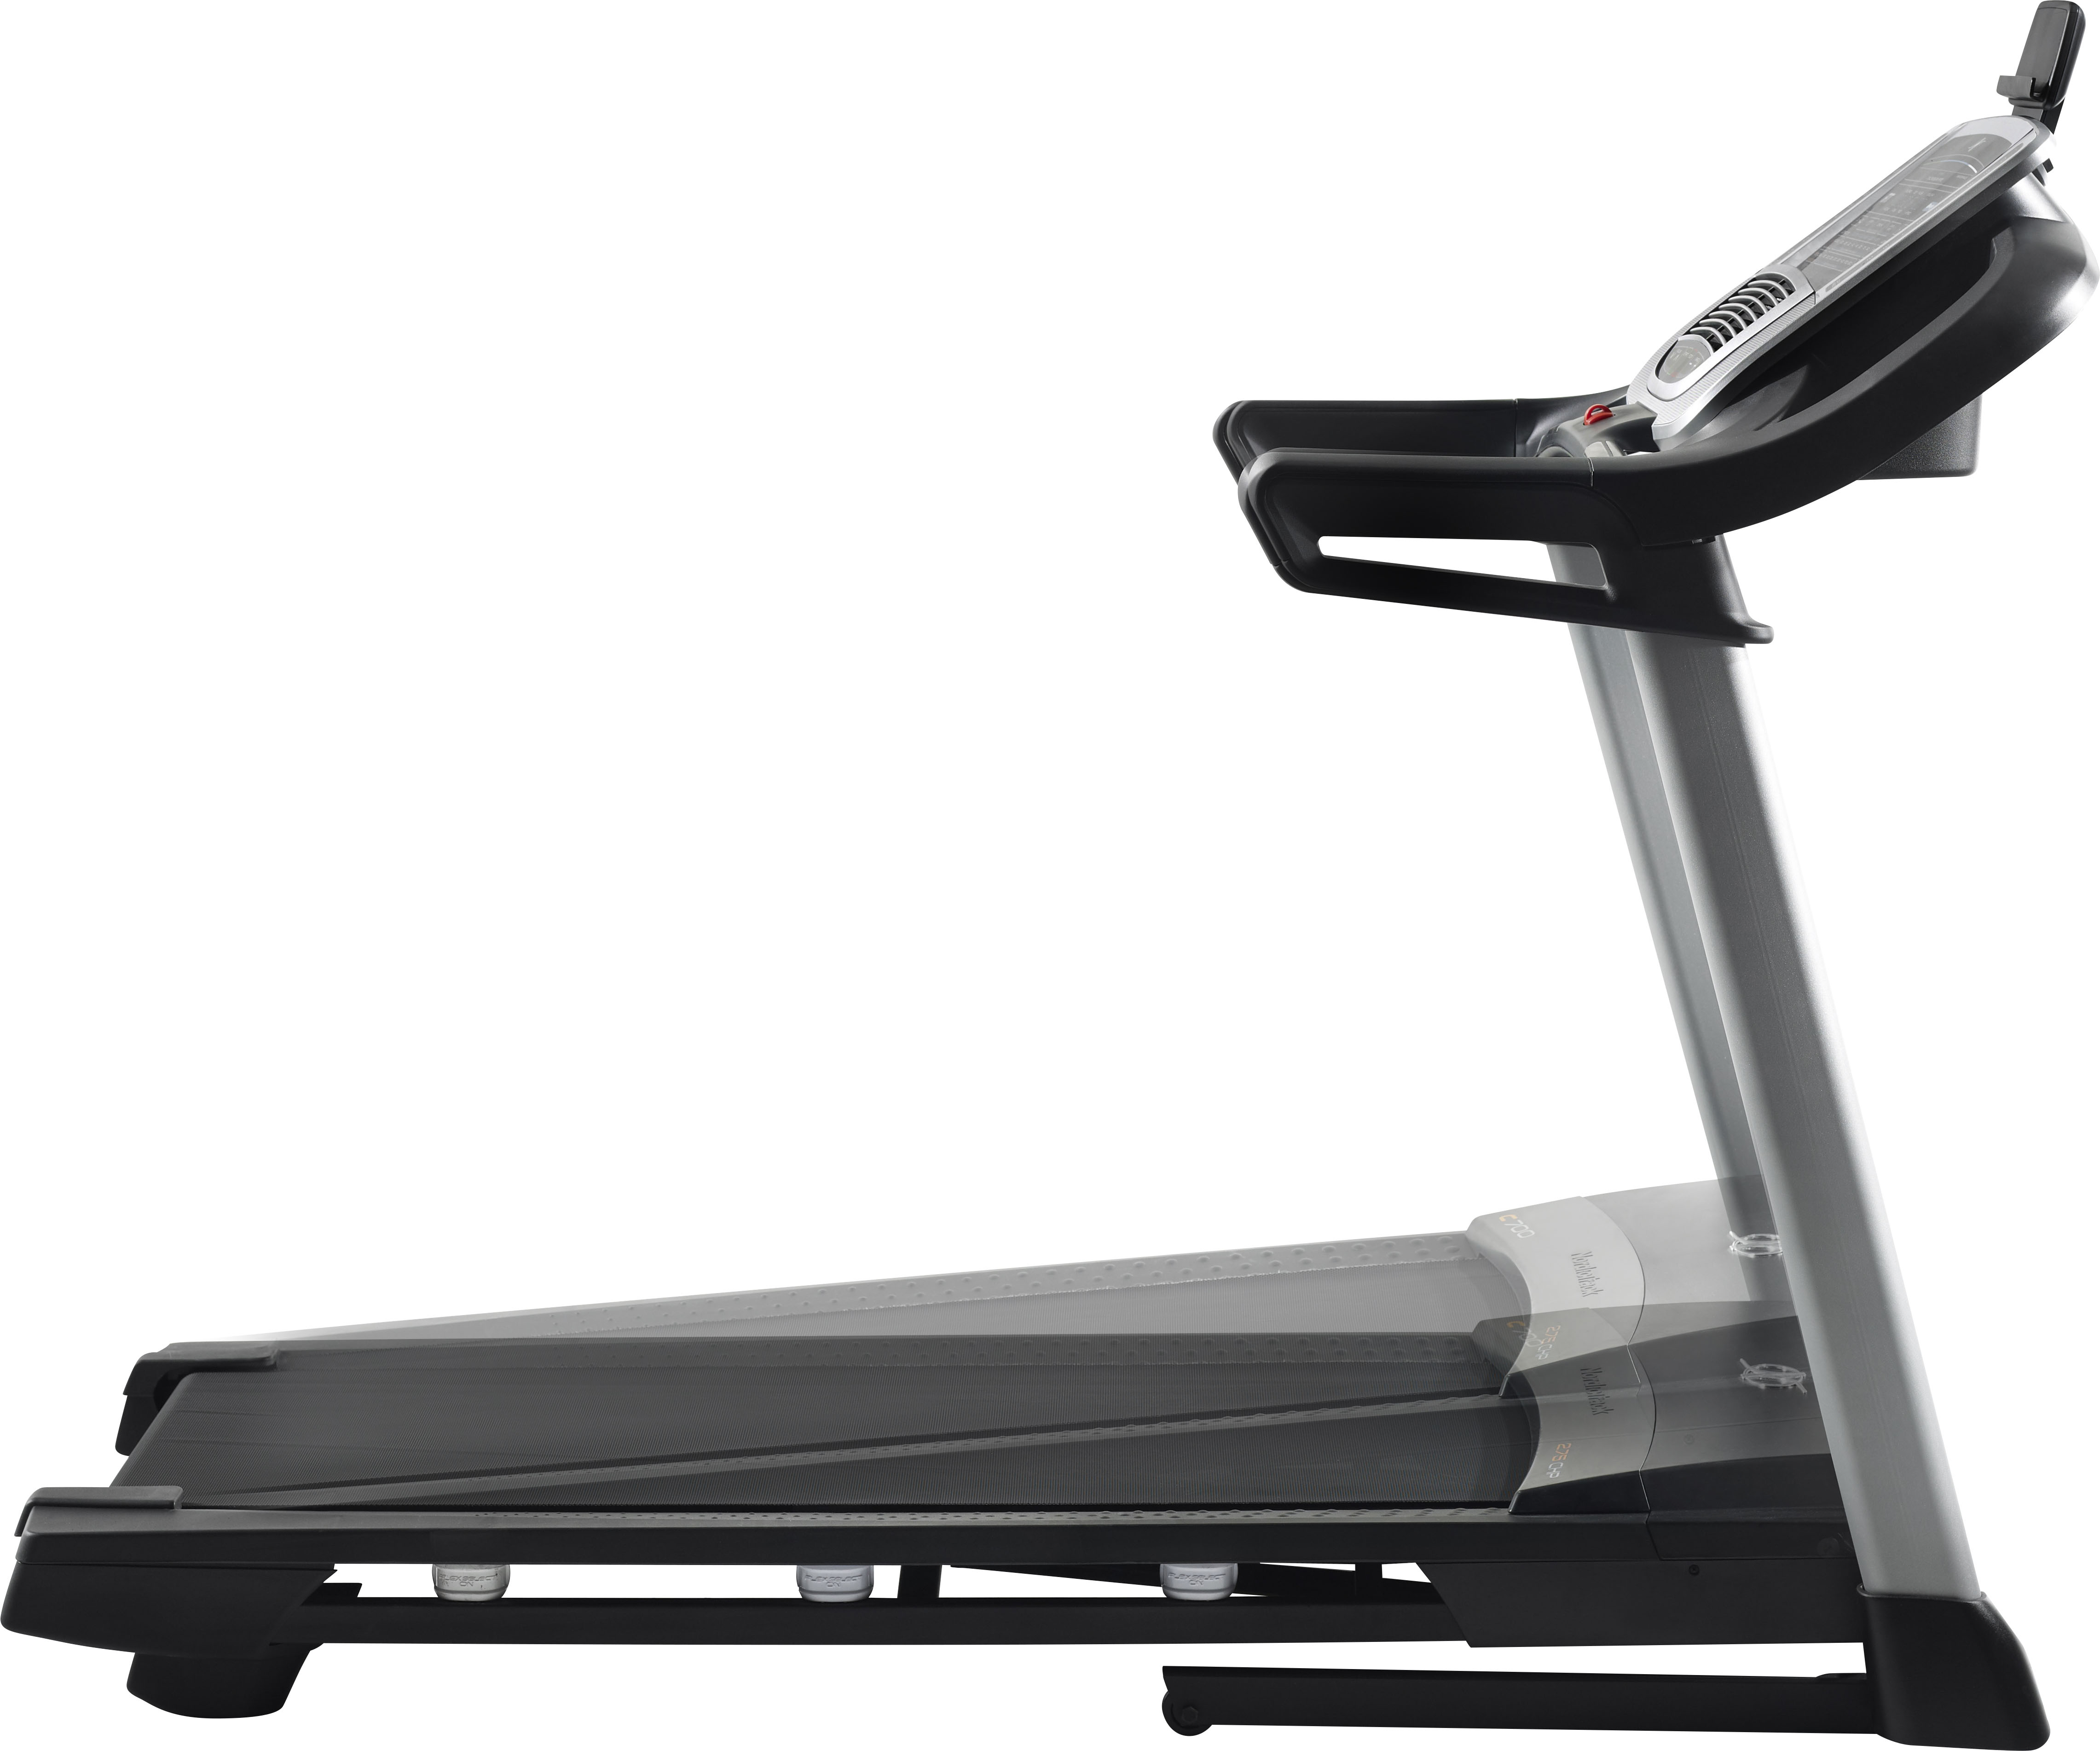 Left View: Nordictrack C 700 Treadmill, Compatible with iFit Personal Training